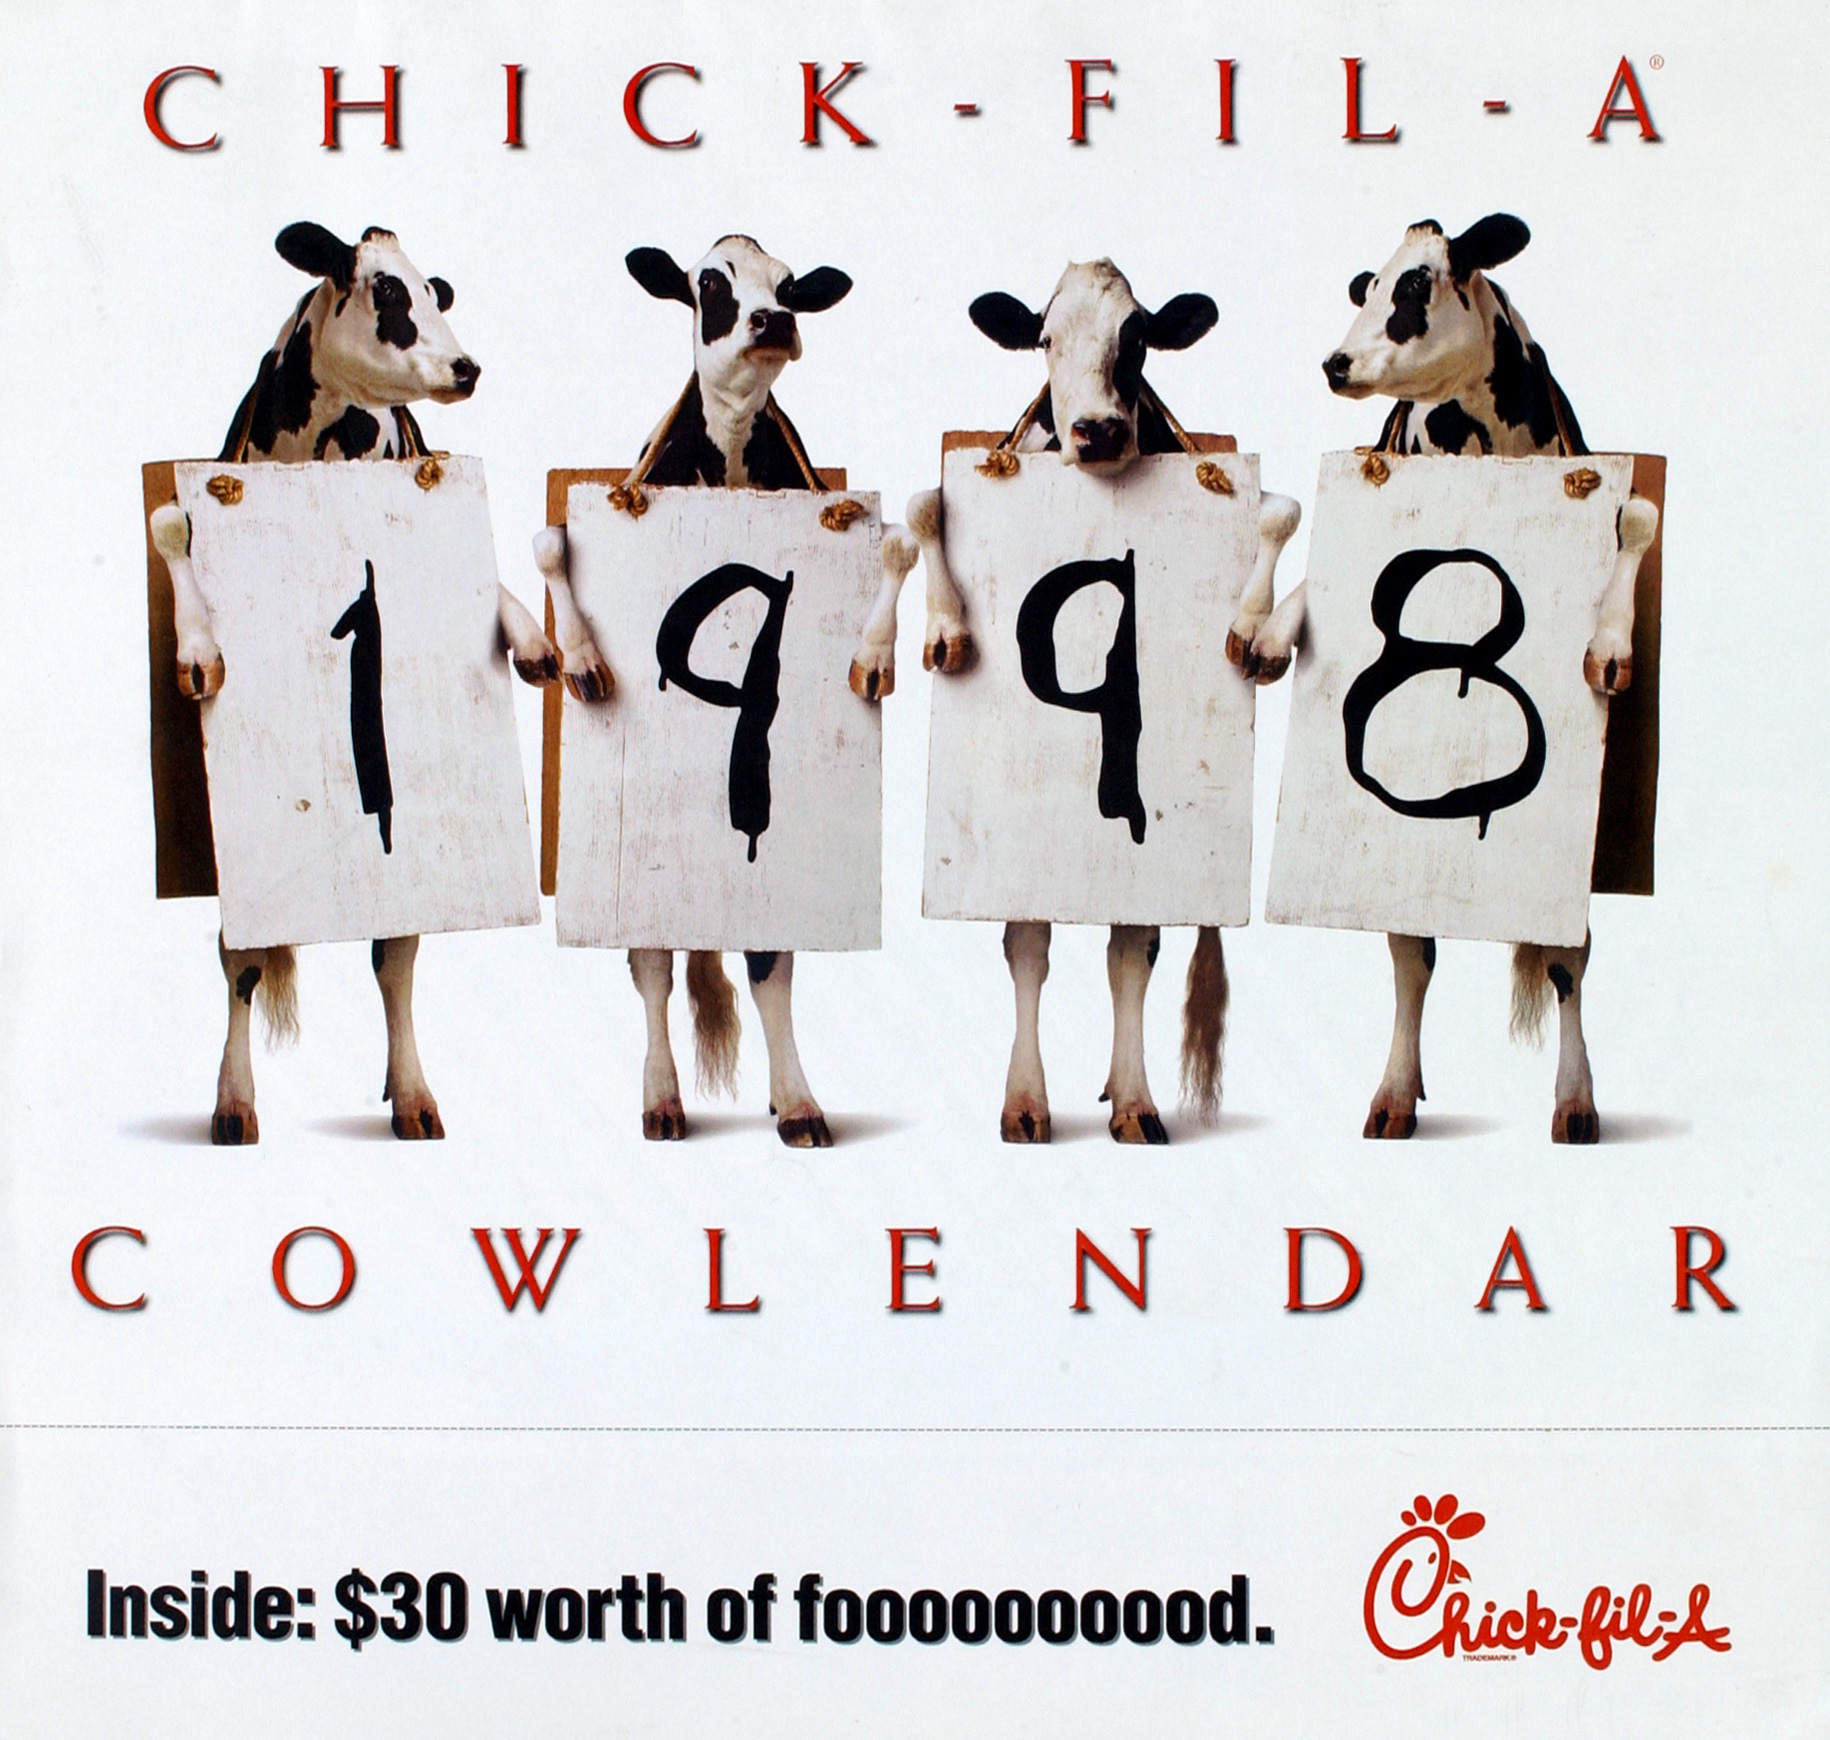 1998 – The first cow calendar is created